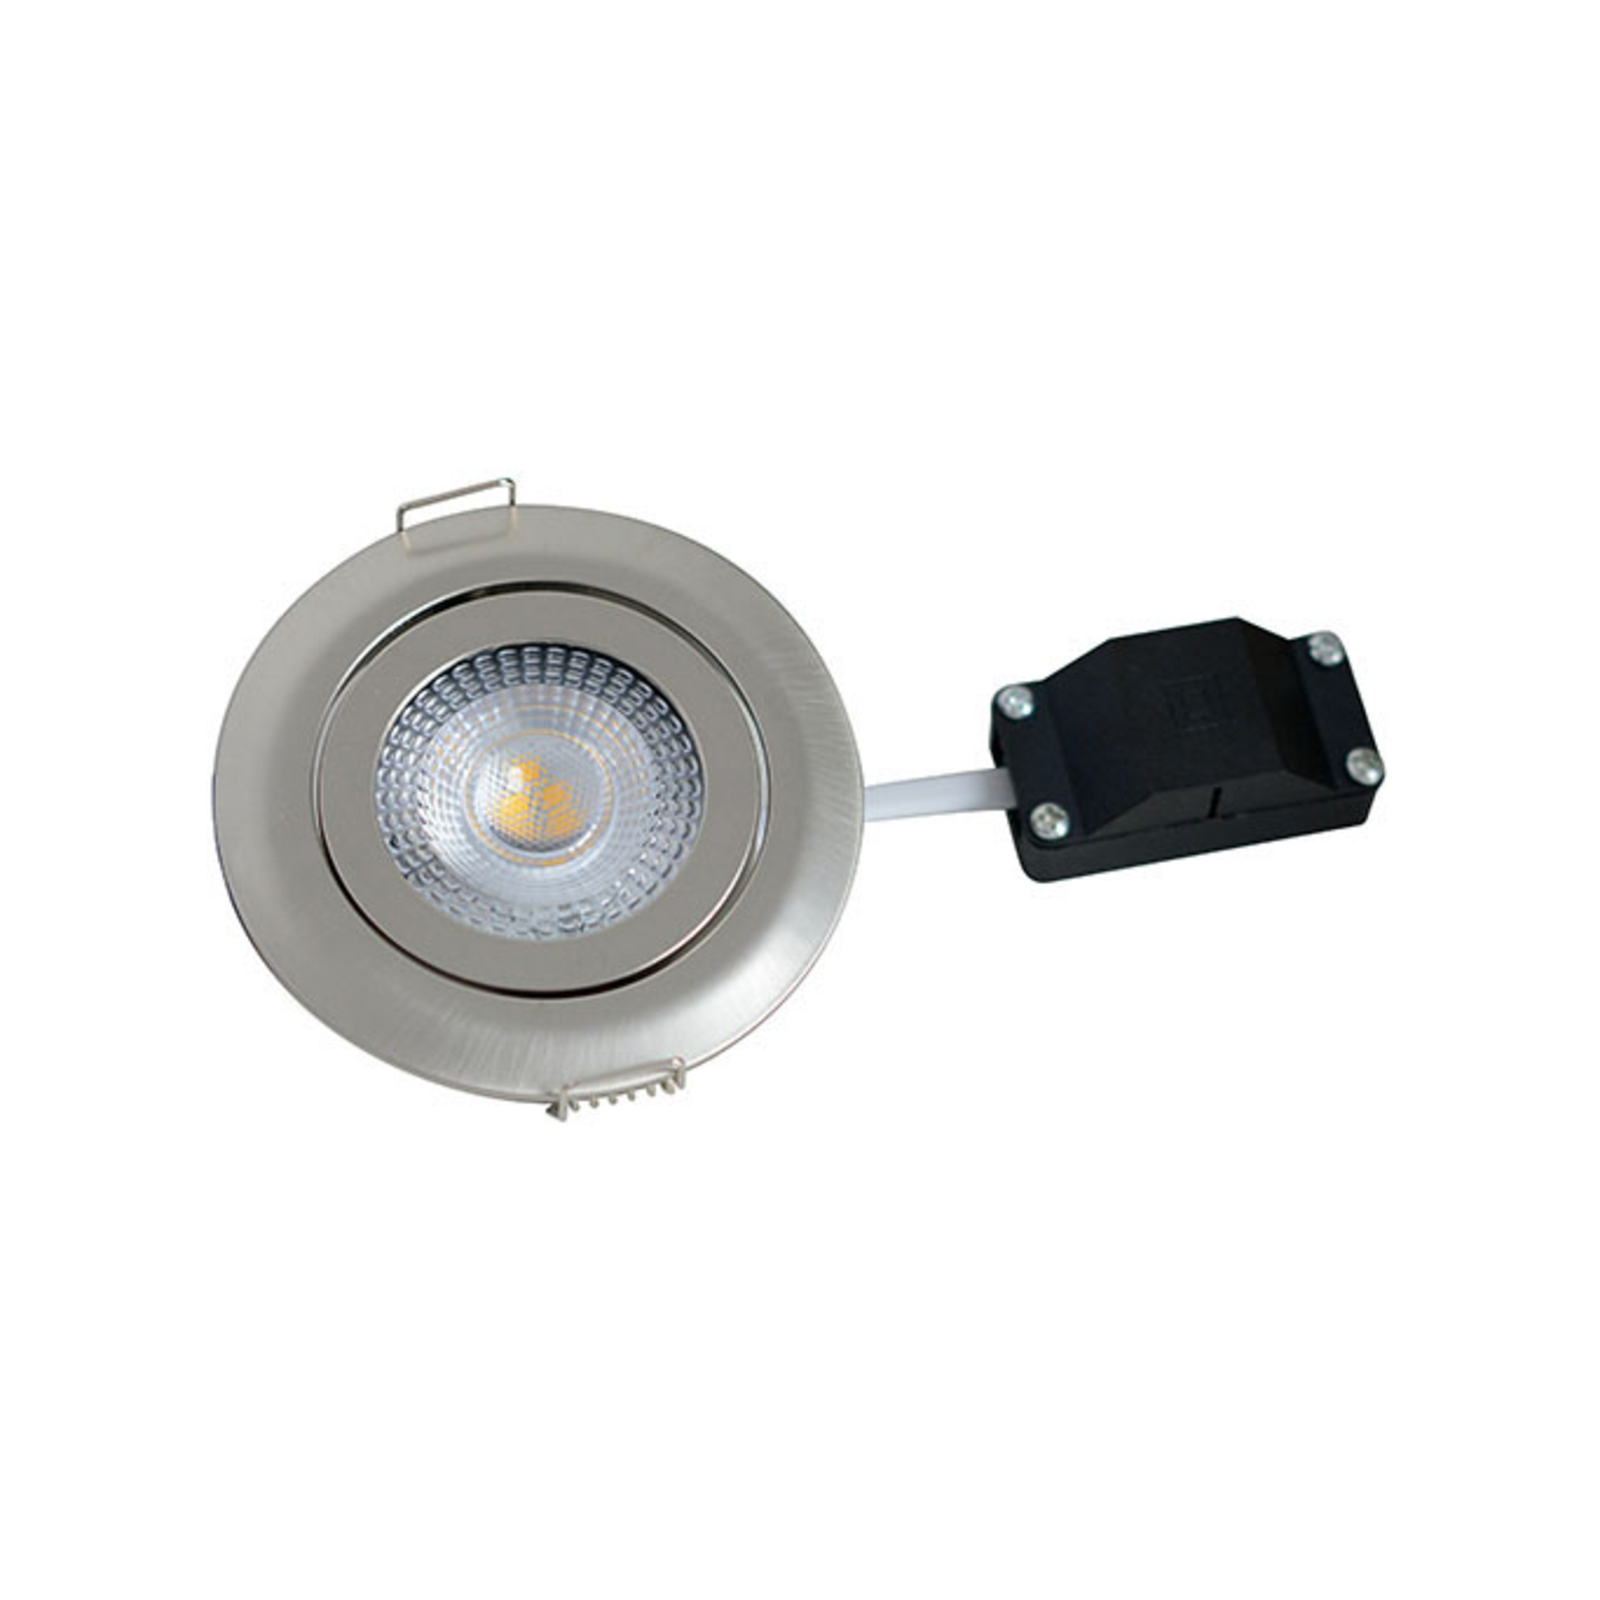 LED inbouwlamp Holstein MS, IP20 40°, staal